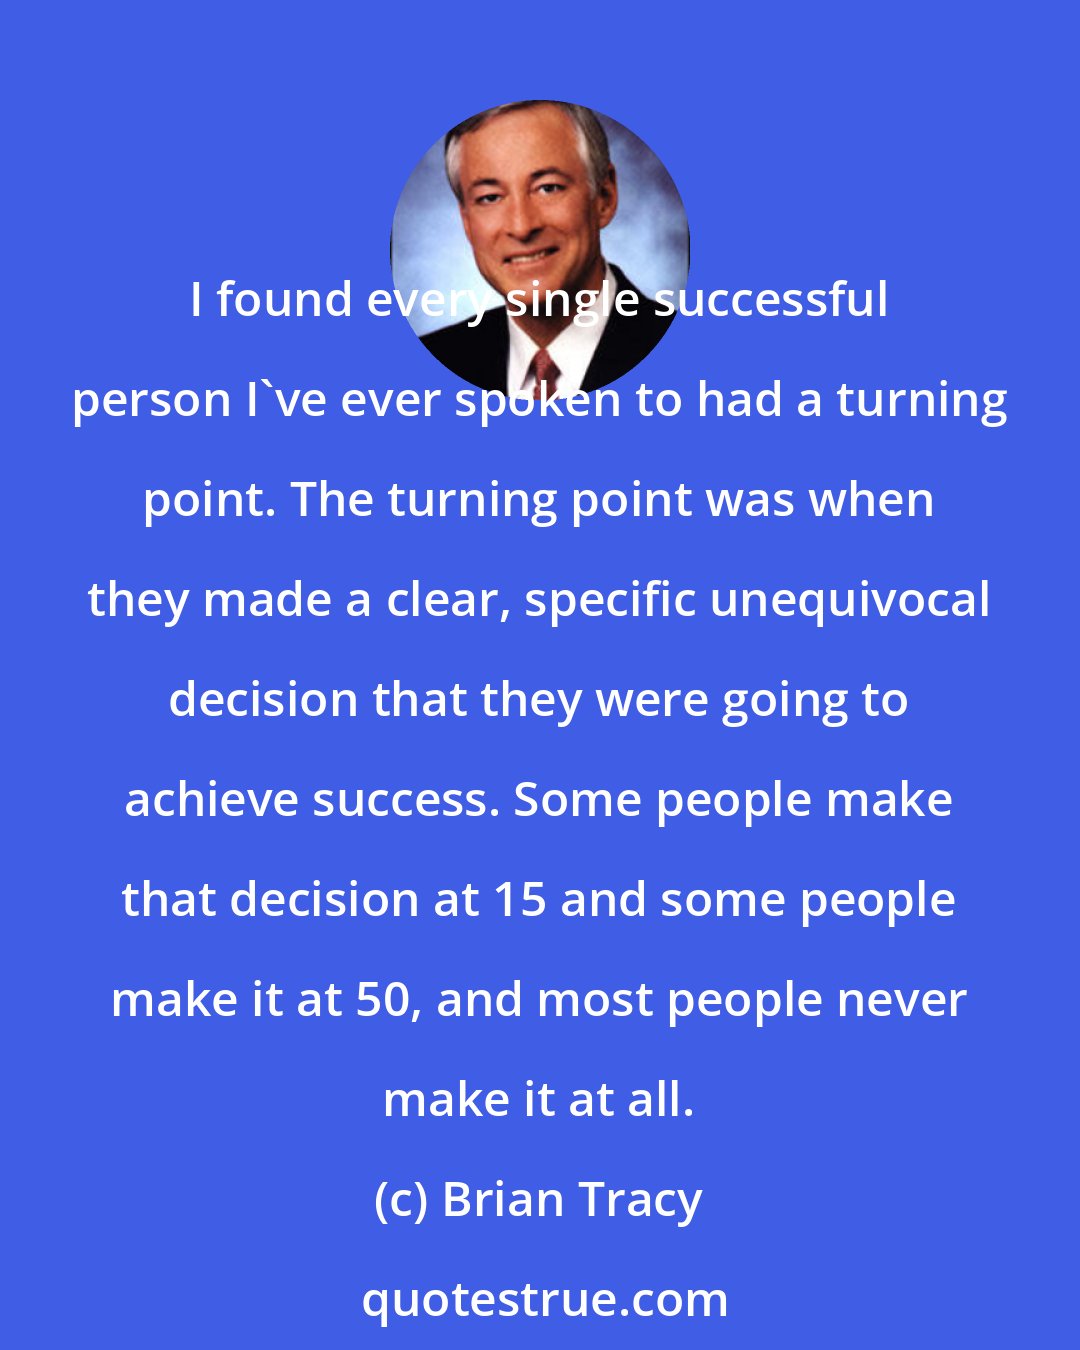 Brian Tracy: I found every single successful person I've ever spoken to had a turning point. The turning point was when they made a clear, specific unequivocal decision that they were going to achieve success. Some people make that decision at 15 and some people make it at 50, and most people never make it at all.